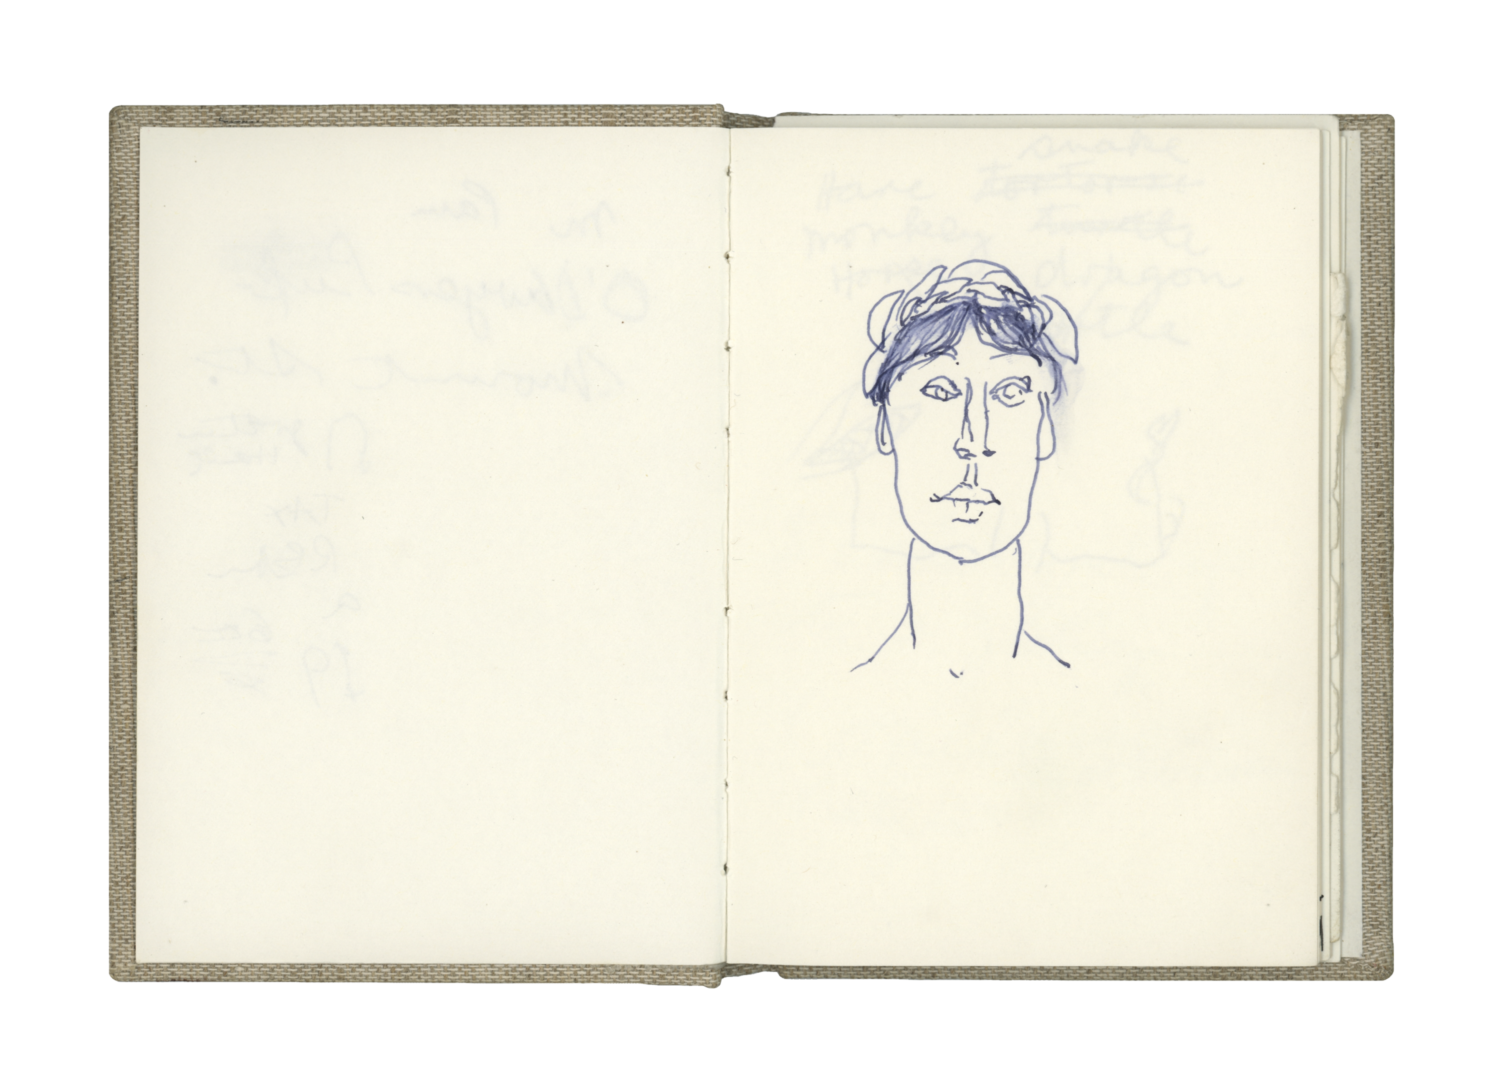 Sketch and notebook (August – October 1996)